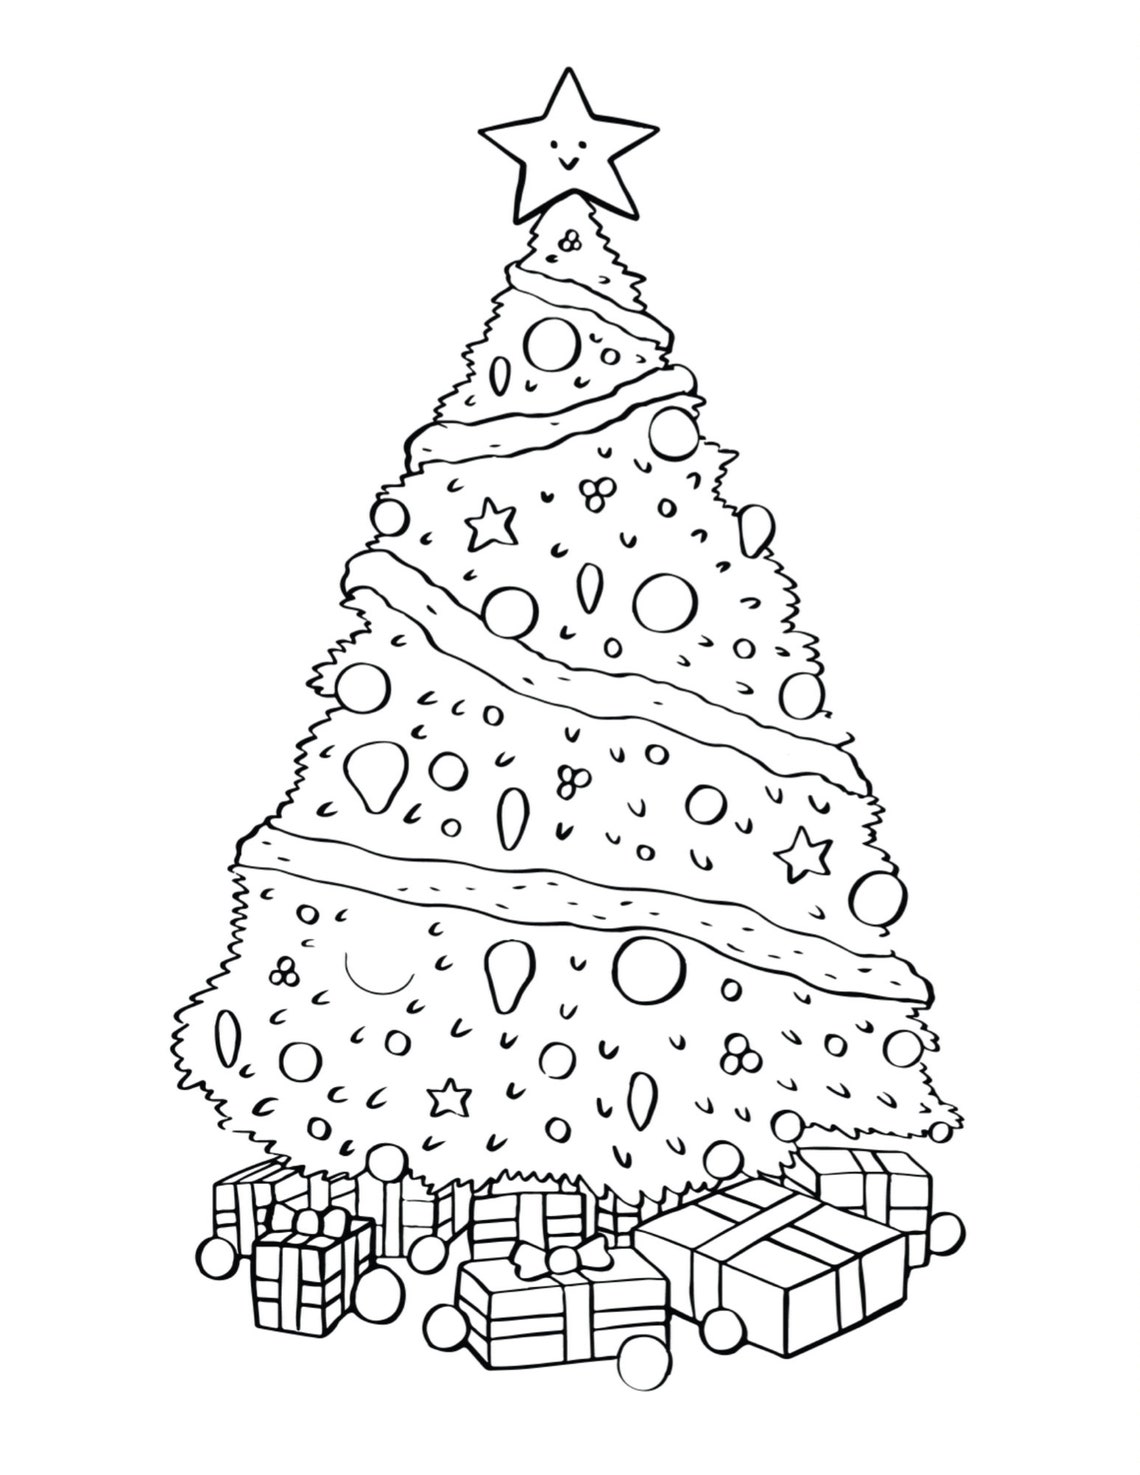 Merry Christmas Printable Coloring Book 30 Pages for Children - Etsy